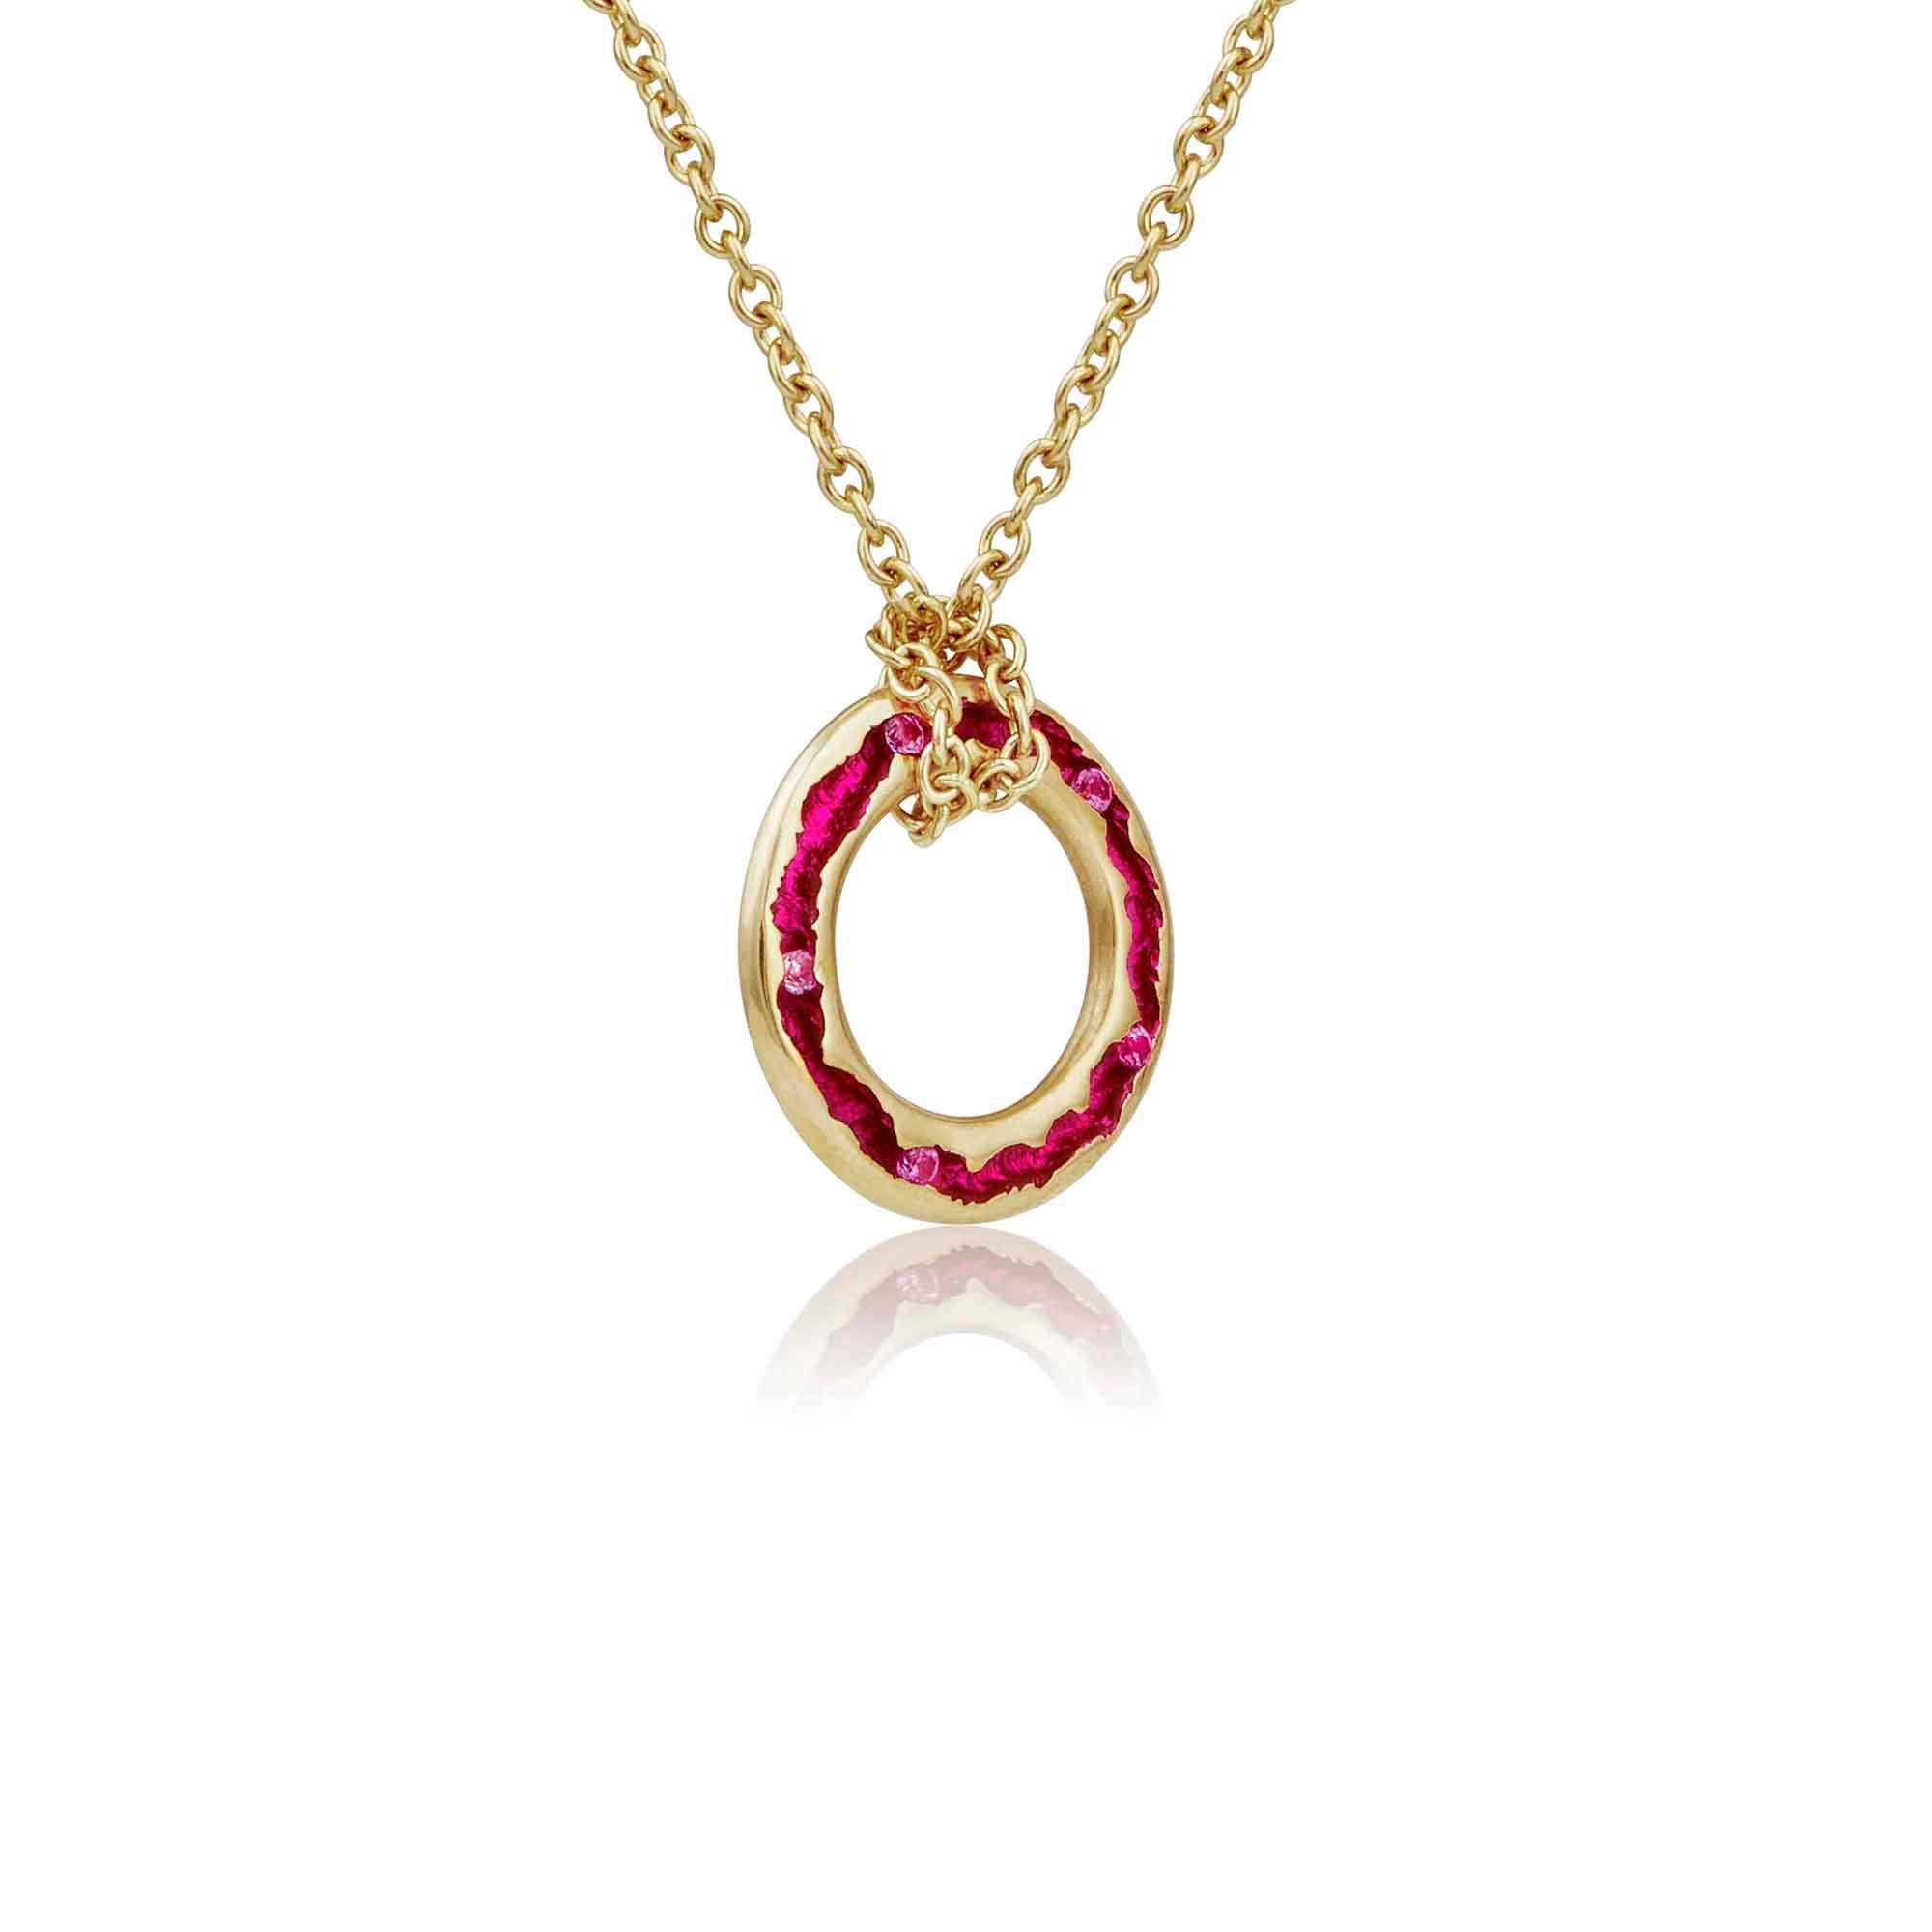 Experience an explosion of joy with this breathtakingly captivating necklace! Imagine a magnificent splash of color that has the power to transform your entire day. Behold the awe-inspiring brilliance of this, vibrant pink necklace, designed to